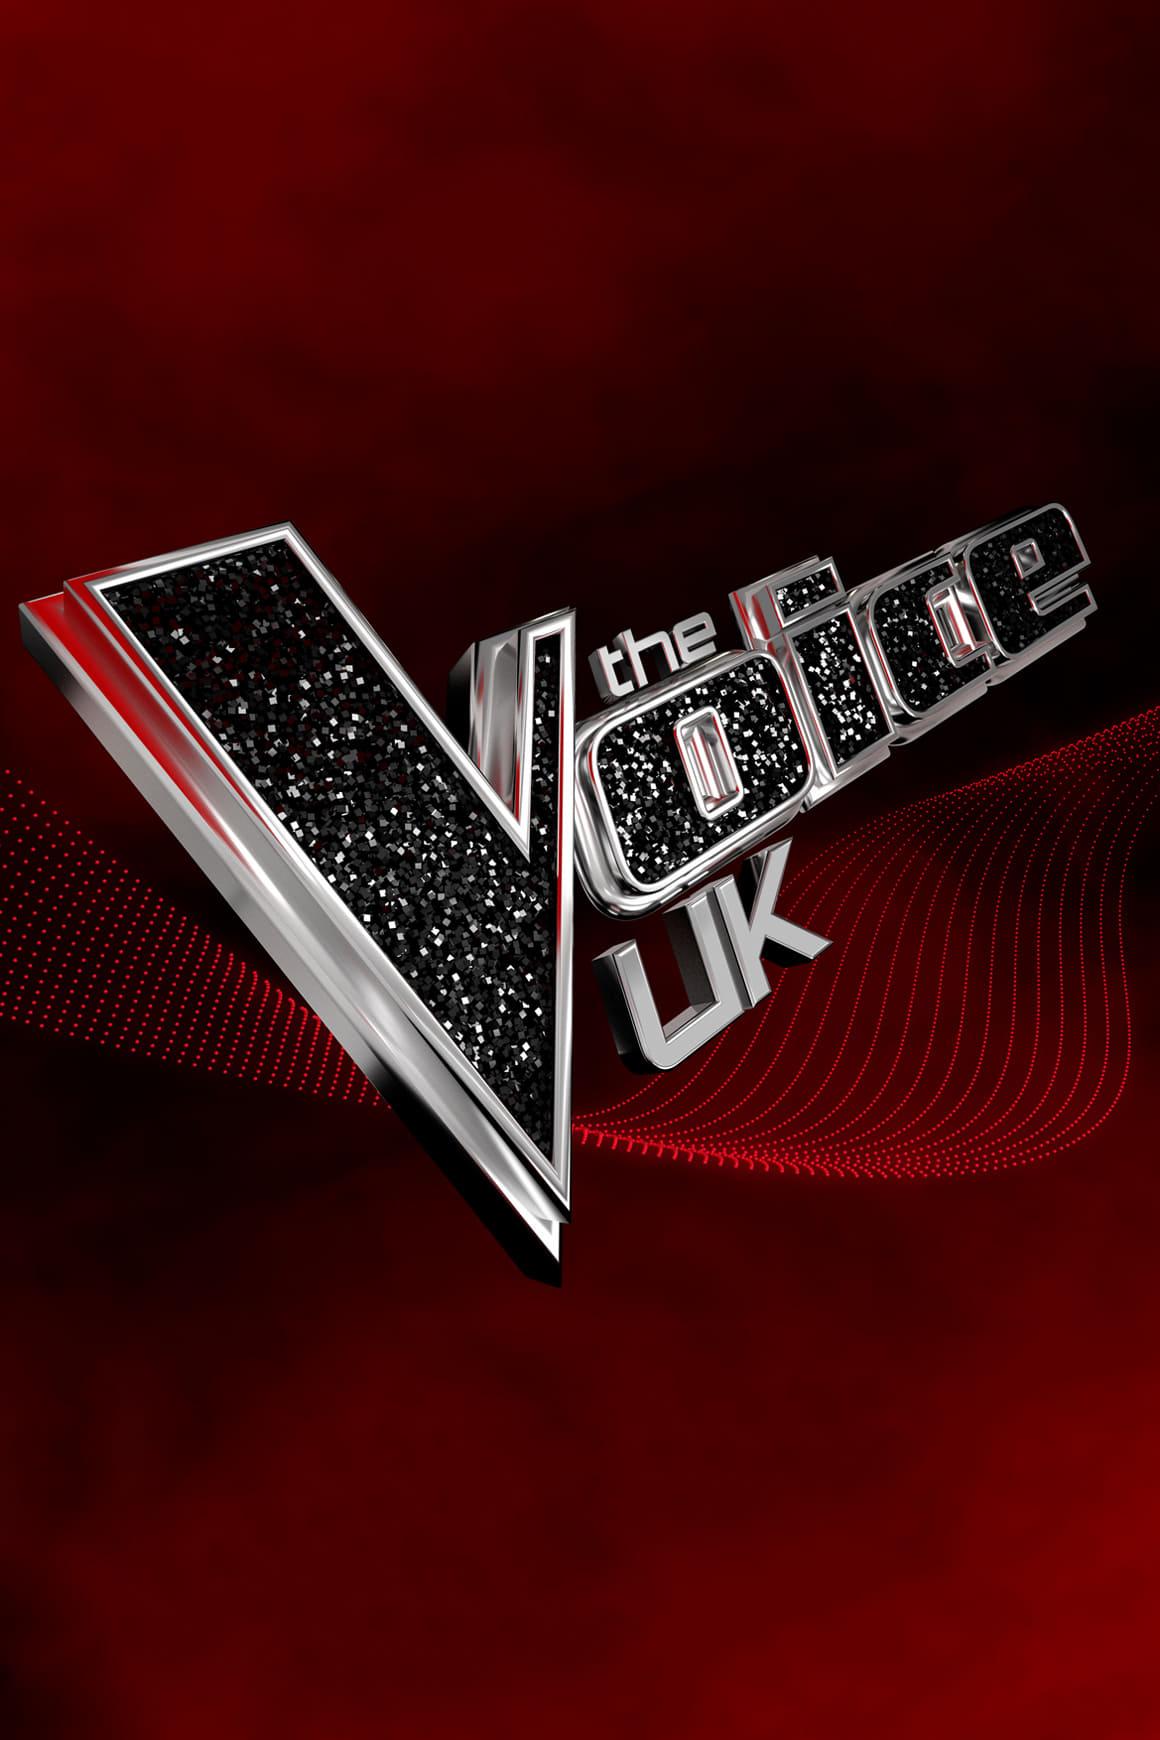 The Voice UK poster